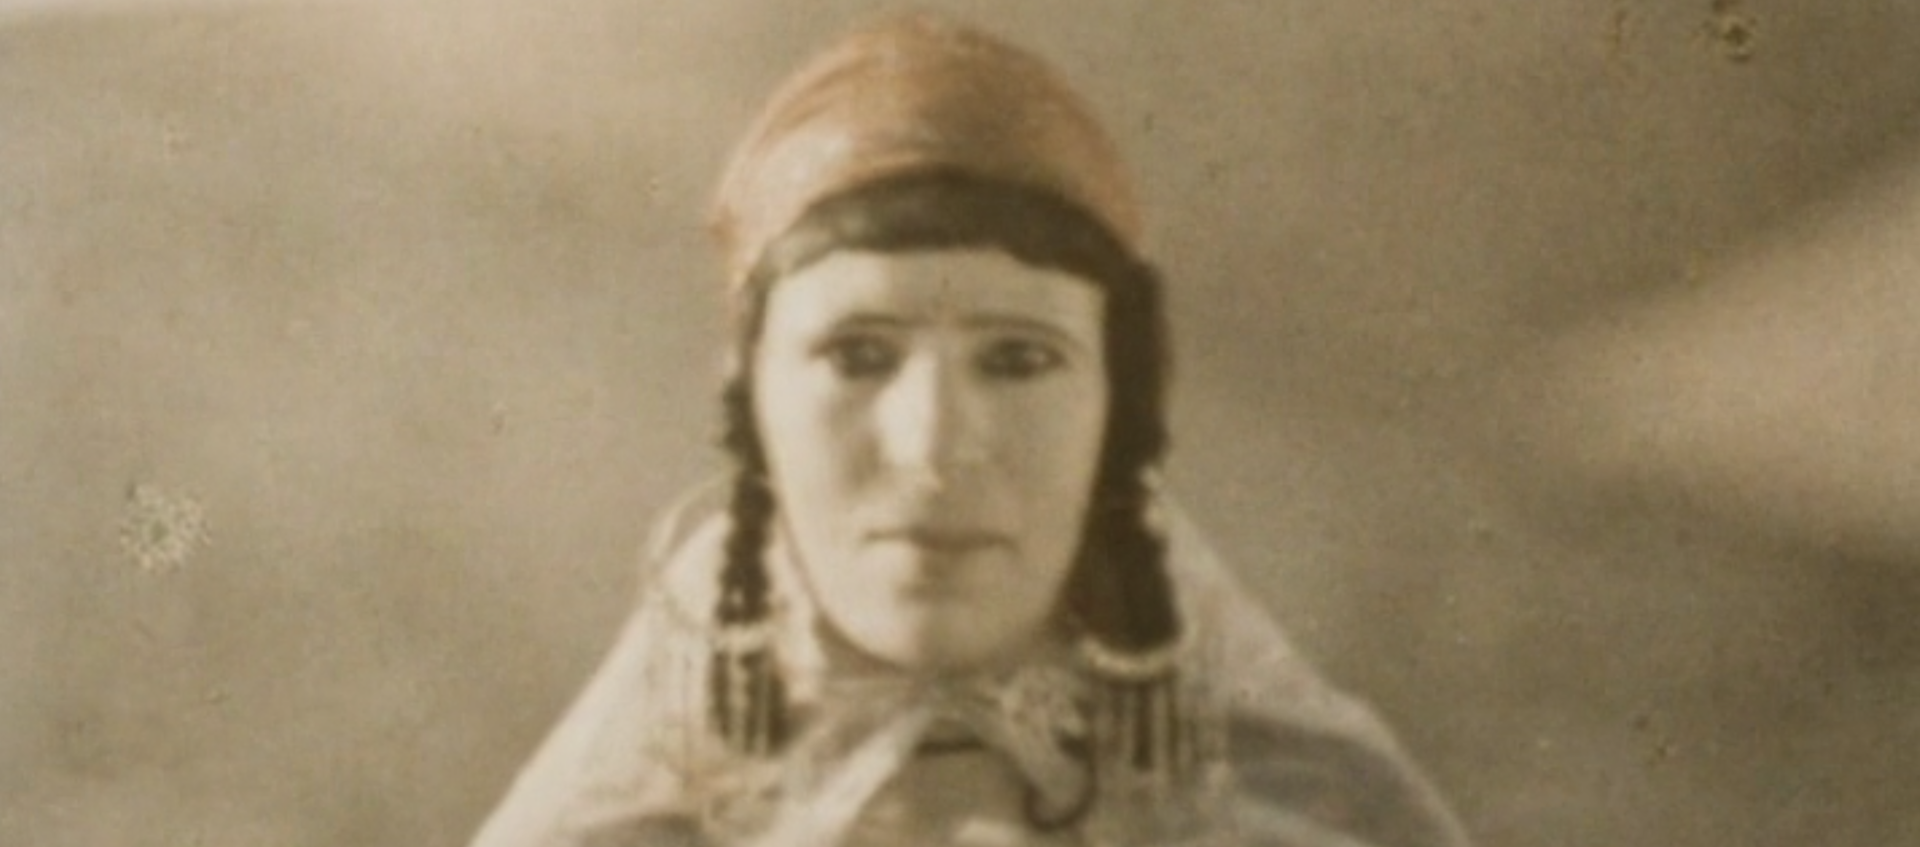 Sepia tone mage of a woman facing the camera wearing a head scarf, braids, large hoop earrings and a cape from Assia Djebar's 1982 French documentary Zerda and the Songs of Forgetting